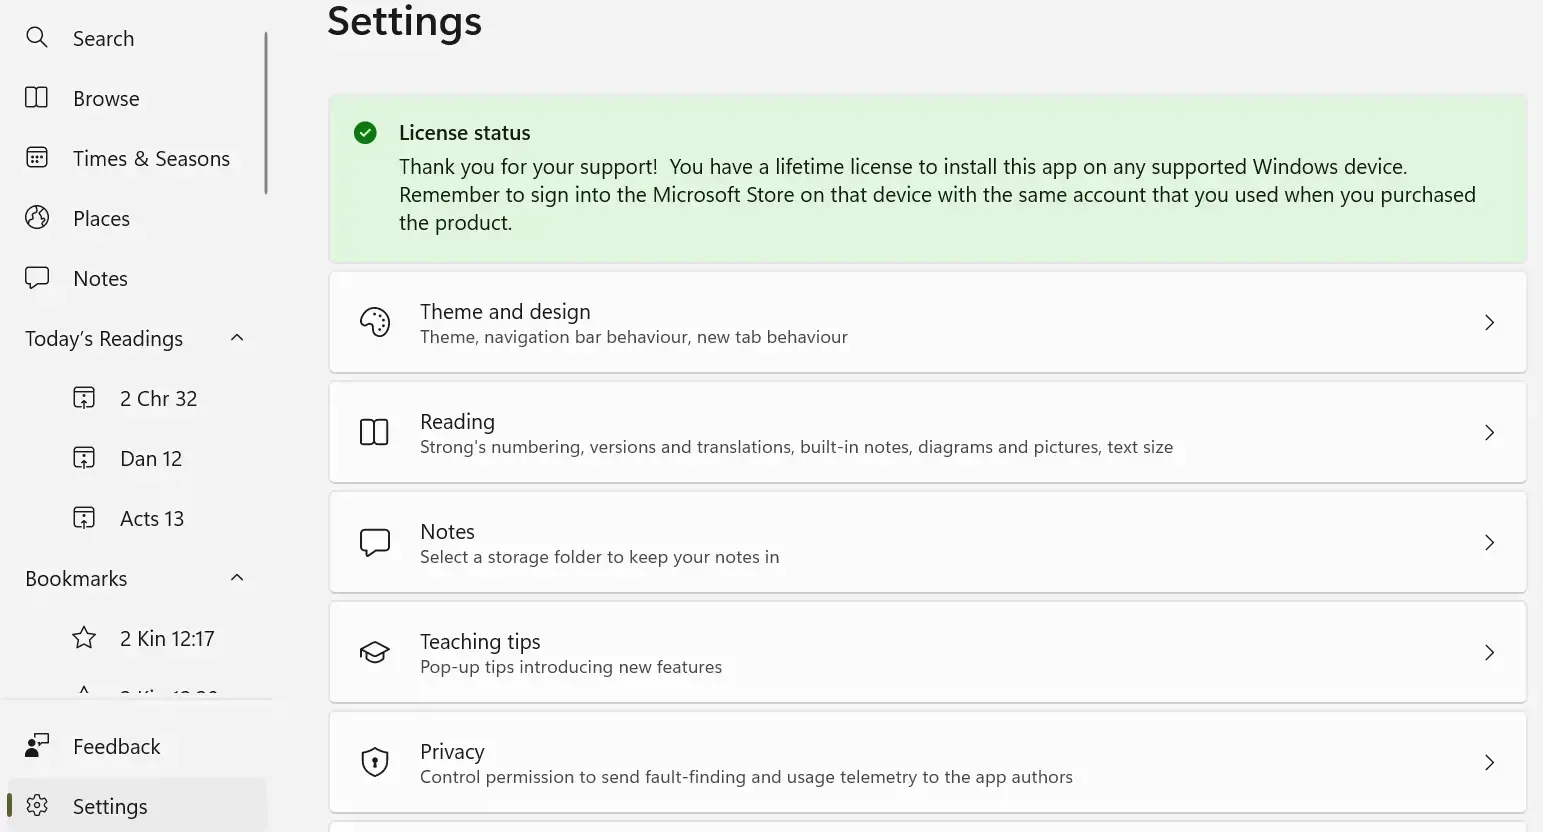 Your Own Notes section of Settings